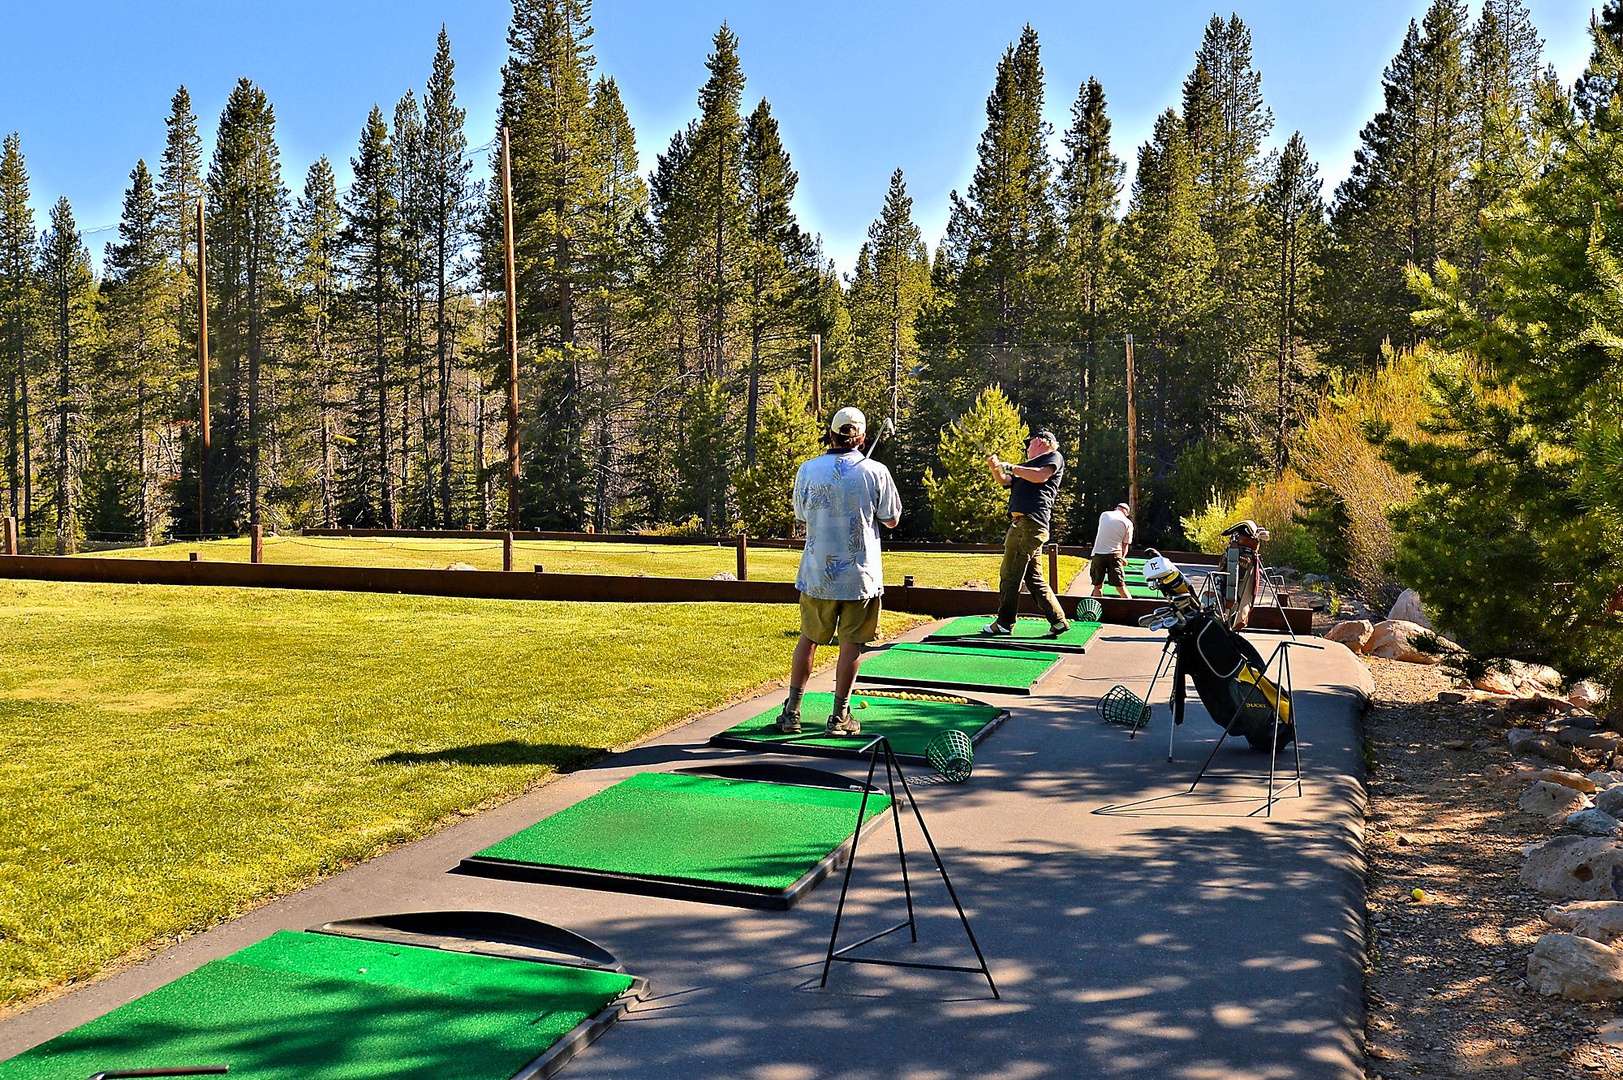 Driving range at the nearby rec center.: Mountaintop Tahoe Donner Getaway